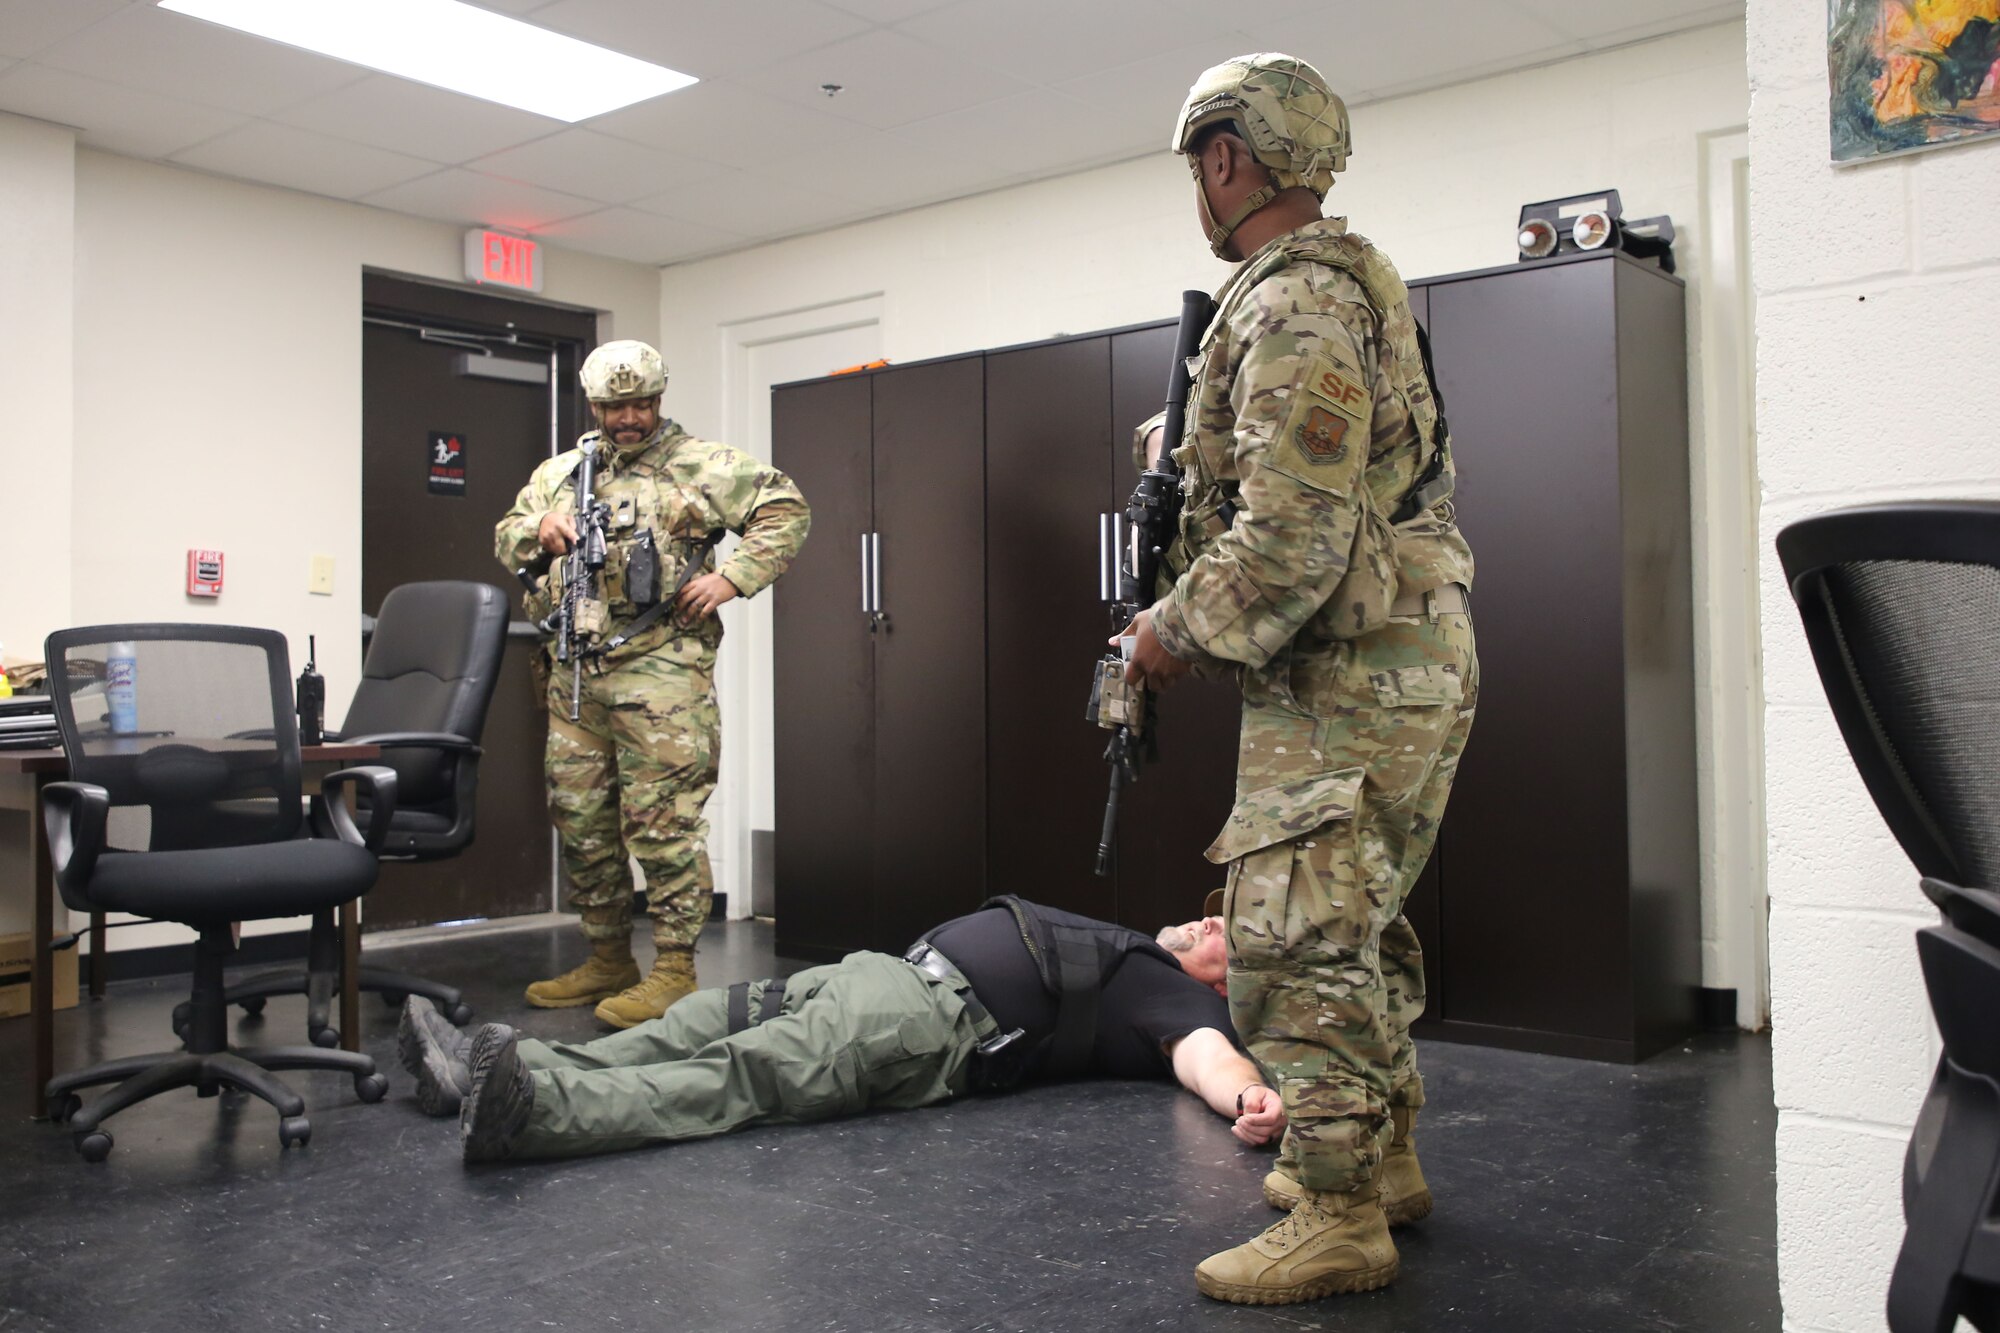 Staff Sgt. Jerome Foye Jr., 7th Security Forces Squadron Police Services NCO in charge, and Tech. Sgt. Axel Sterrett, 7th SFS flight sergeant, simulate taking down an active shooter during an exercise at Dyess Air Force Base, Texas, May 24, 2022.